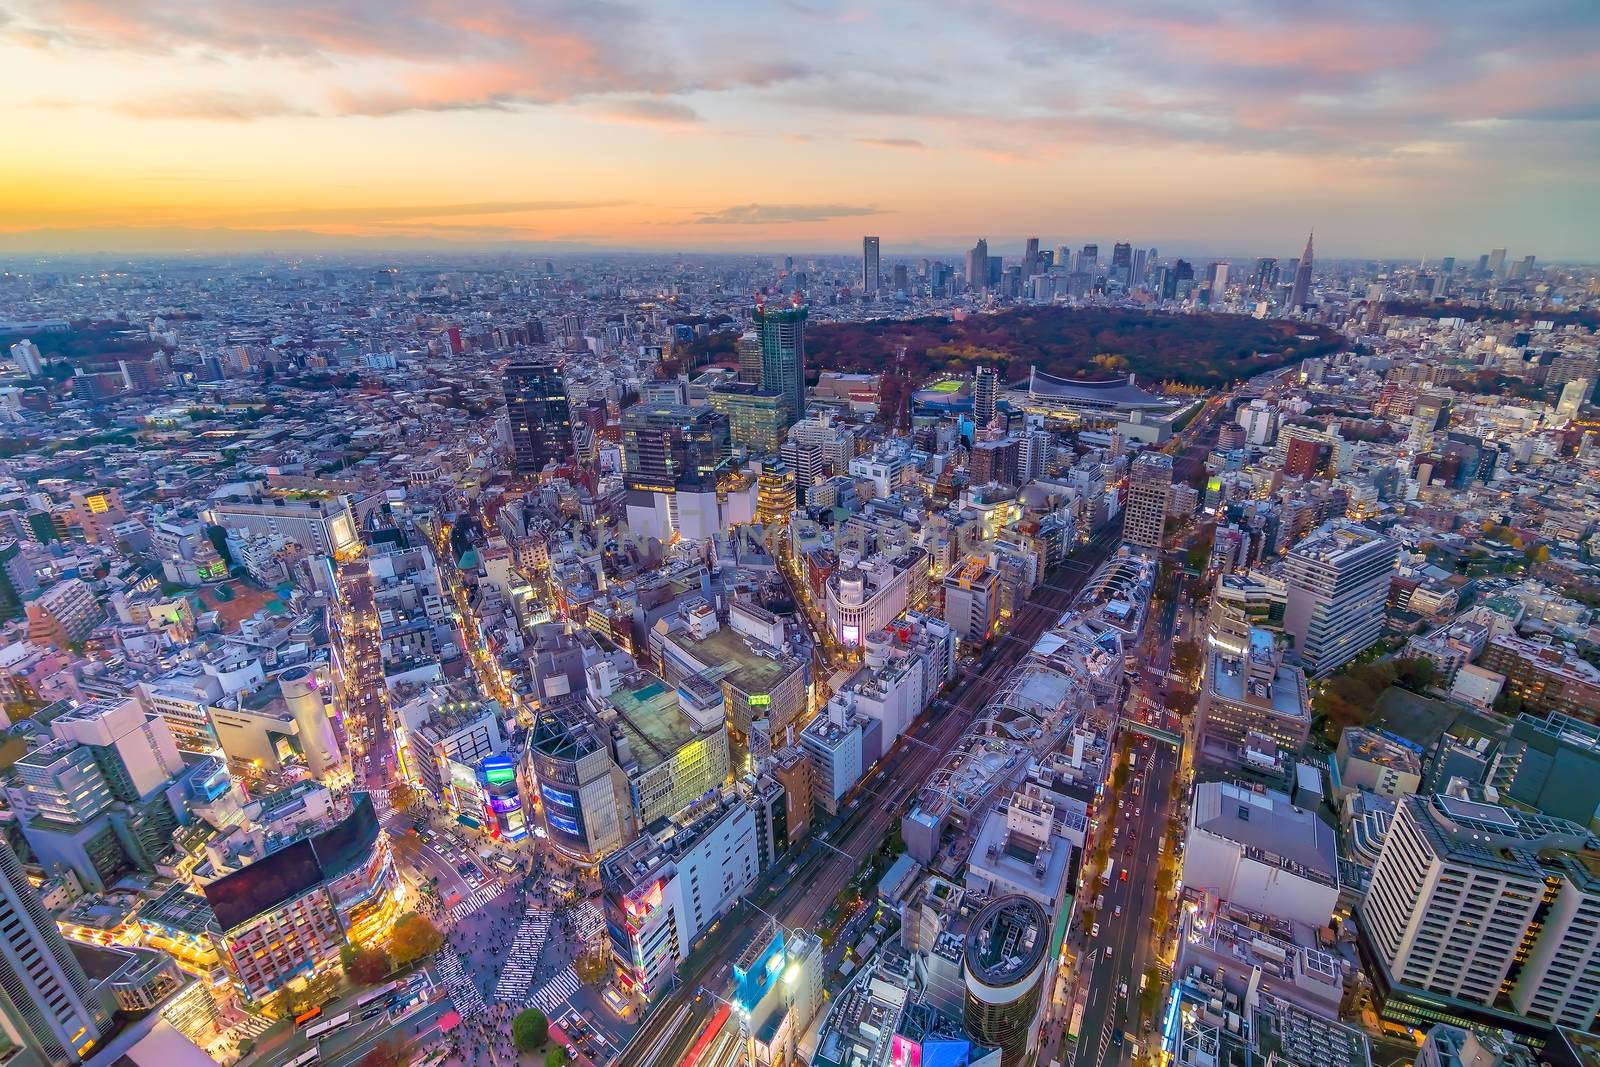 Top view of Tokyo city skyline at sunset by f11photo